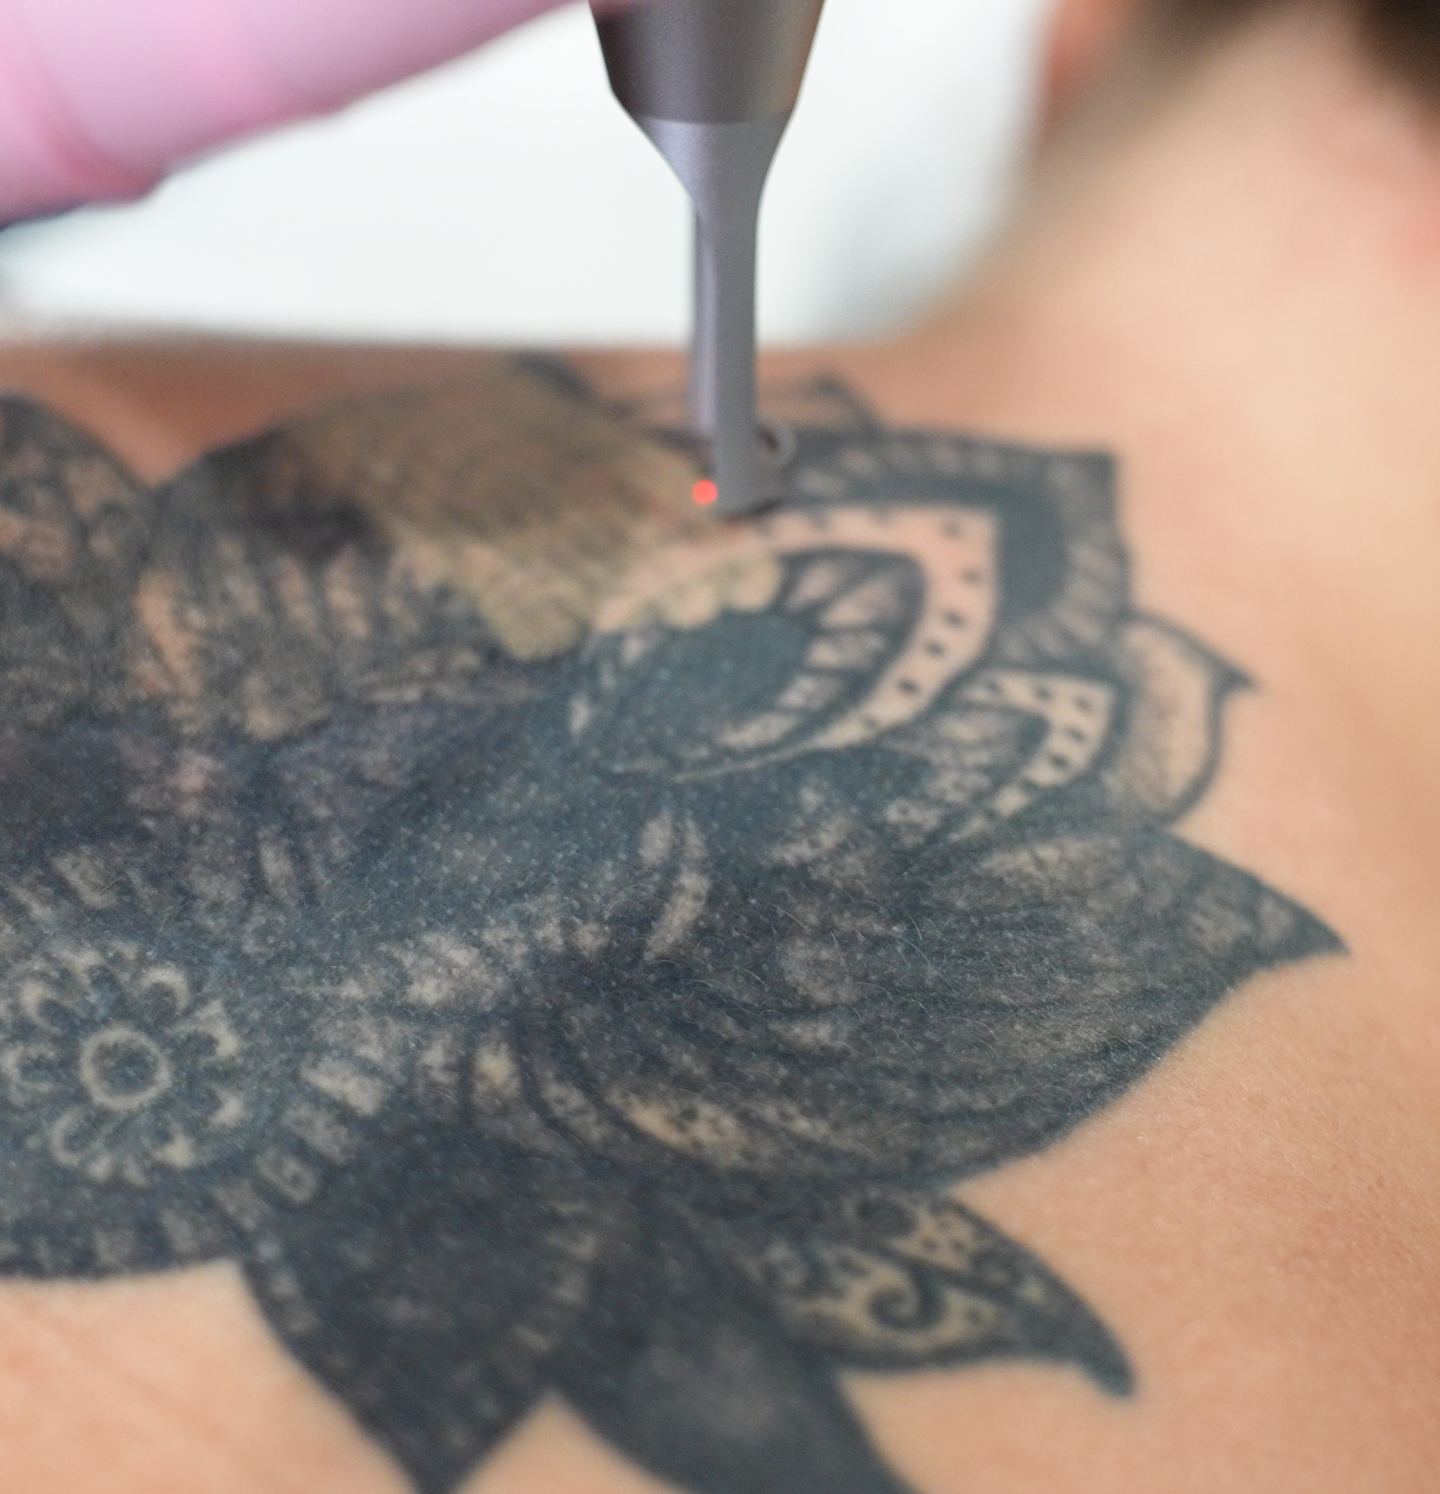 What Can I Expect After Each Laser Tattoo Removal Treatment?